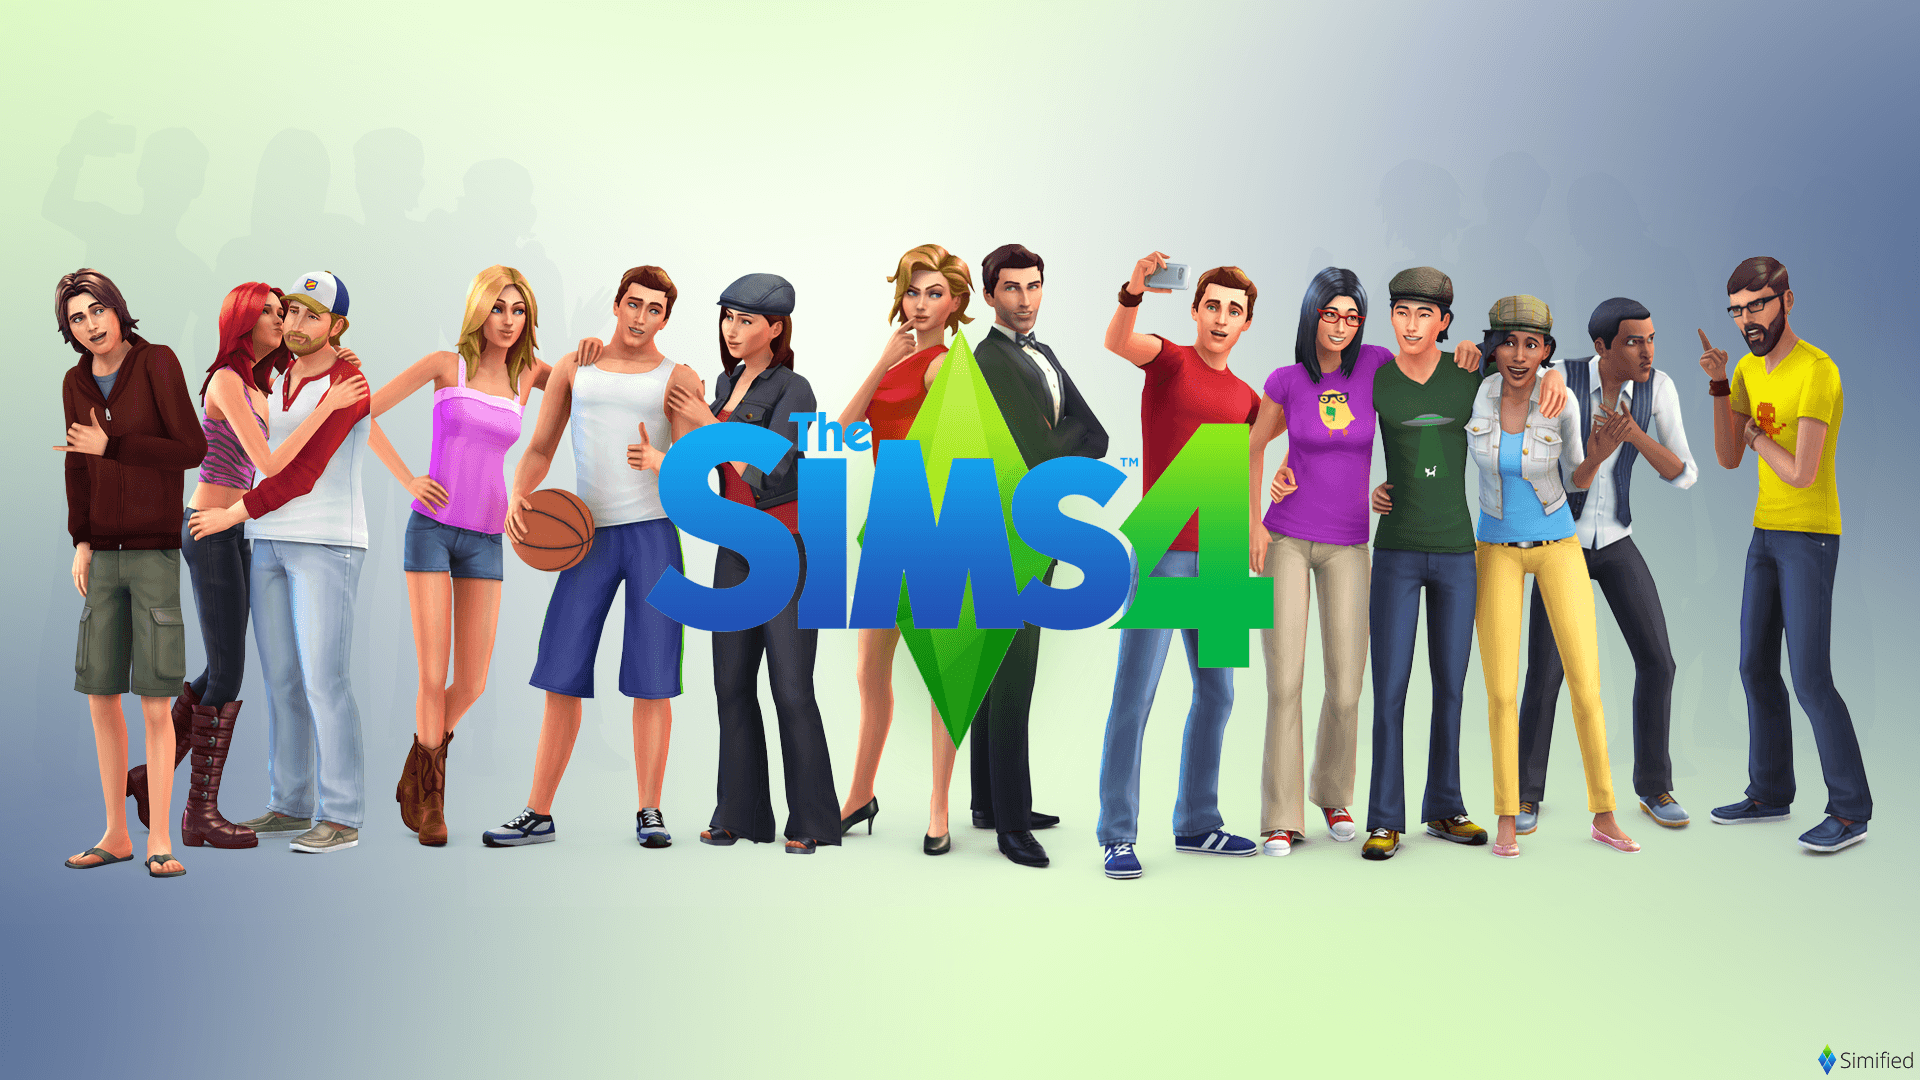 The Sims Wallpaper High Quality